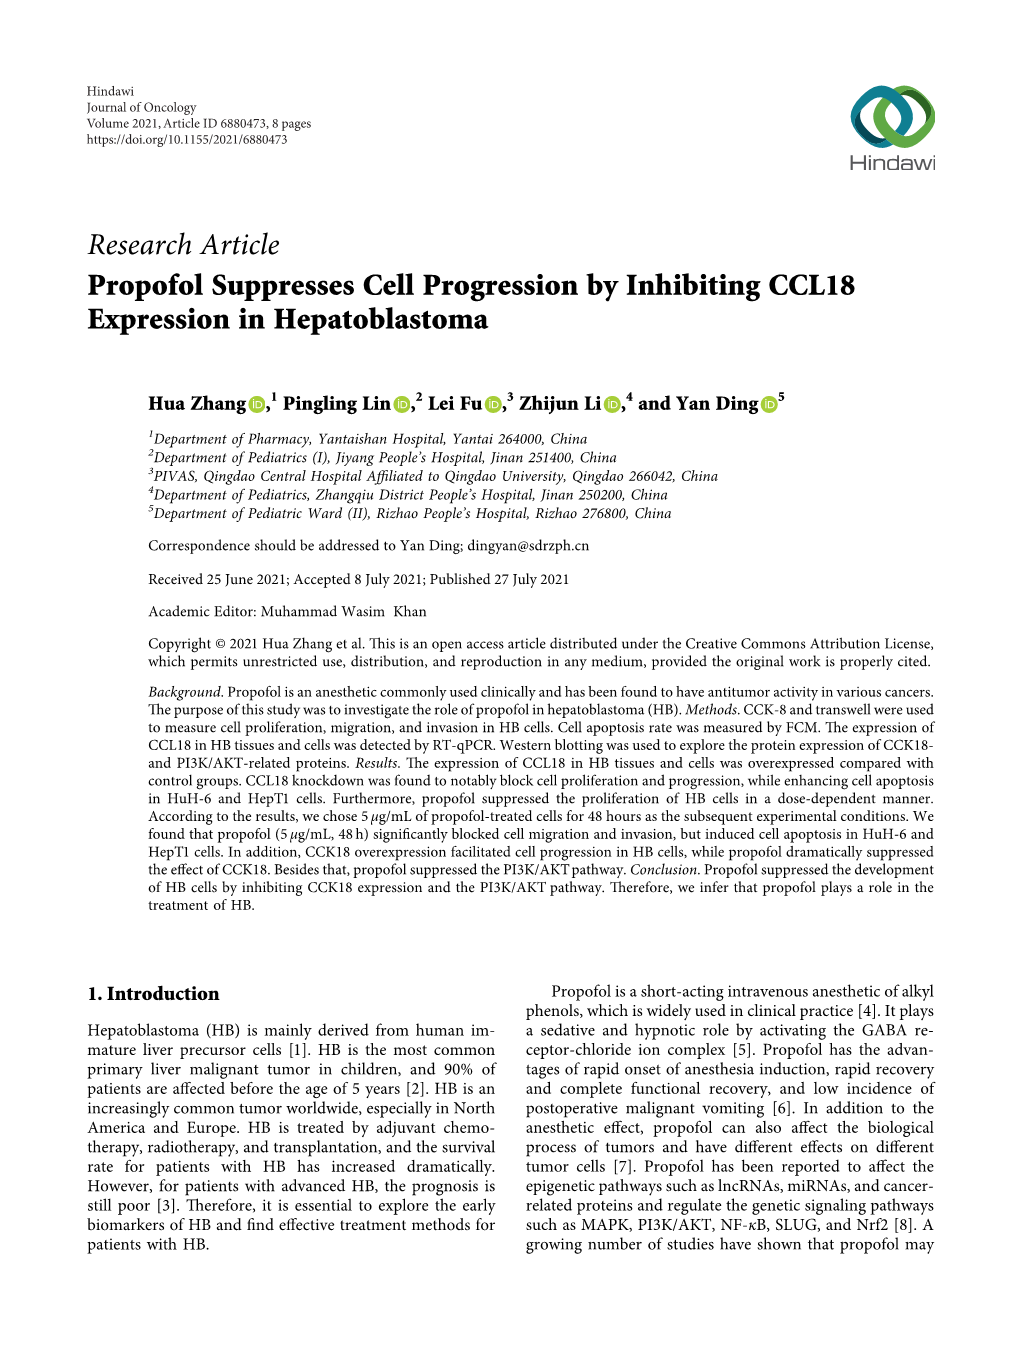 Propofol Suppresses Cell Progression by Inhibiting CCL18 Expression in Hepatoblastoma